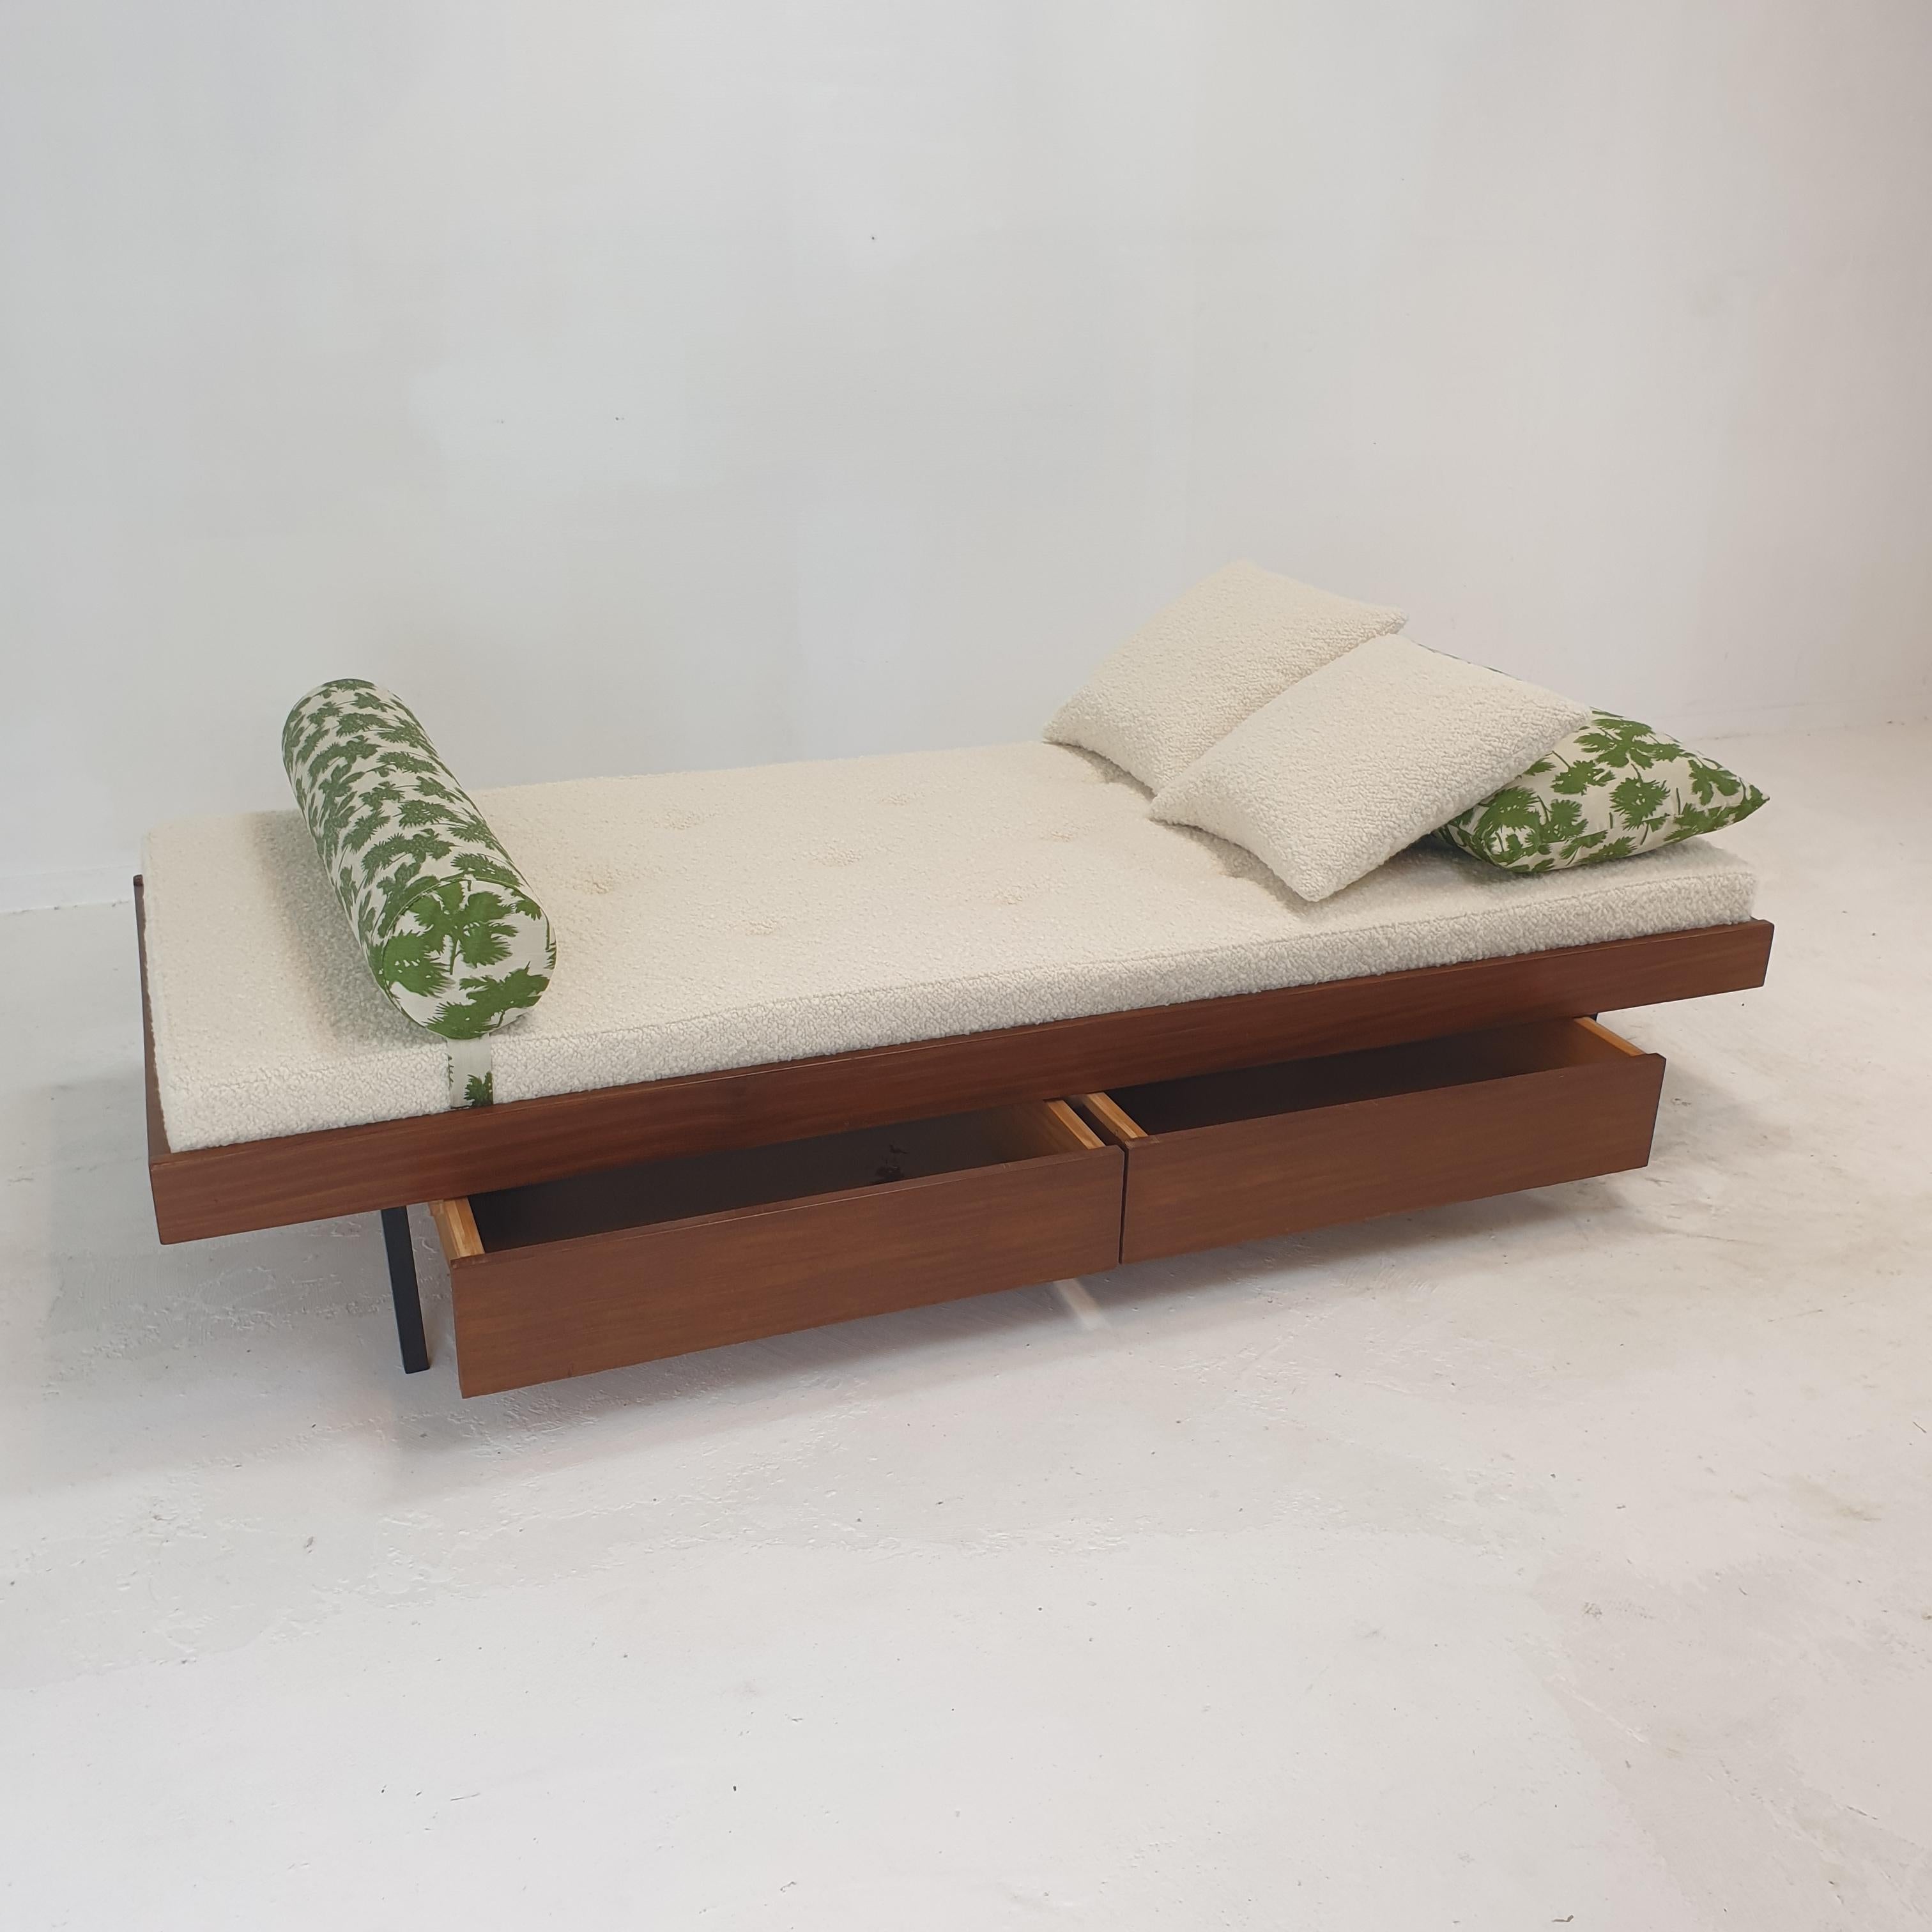 Teak Daybed with Dedar Cushions and Bolster, 1960s For Sale 2